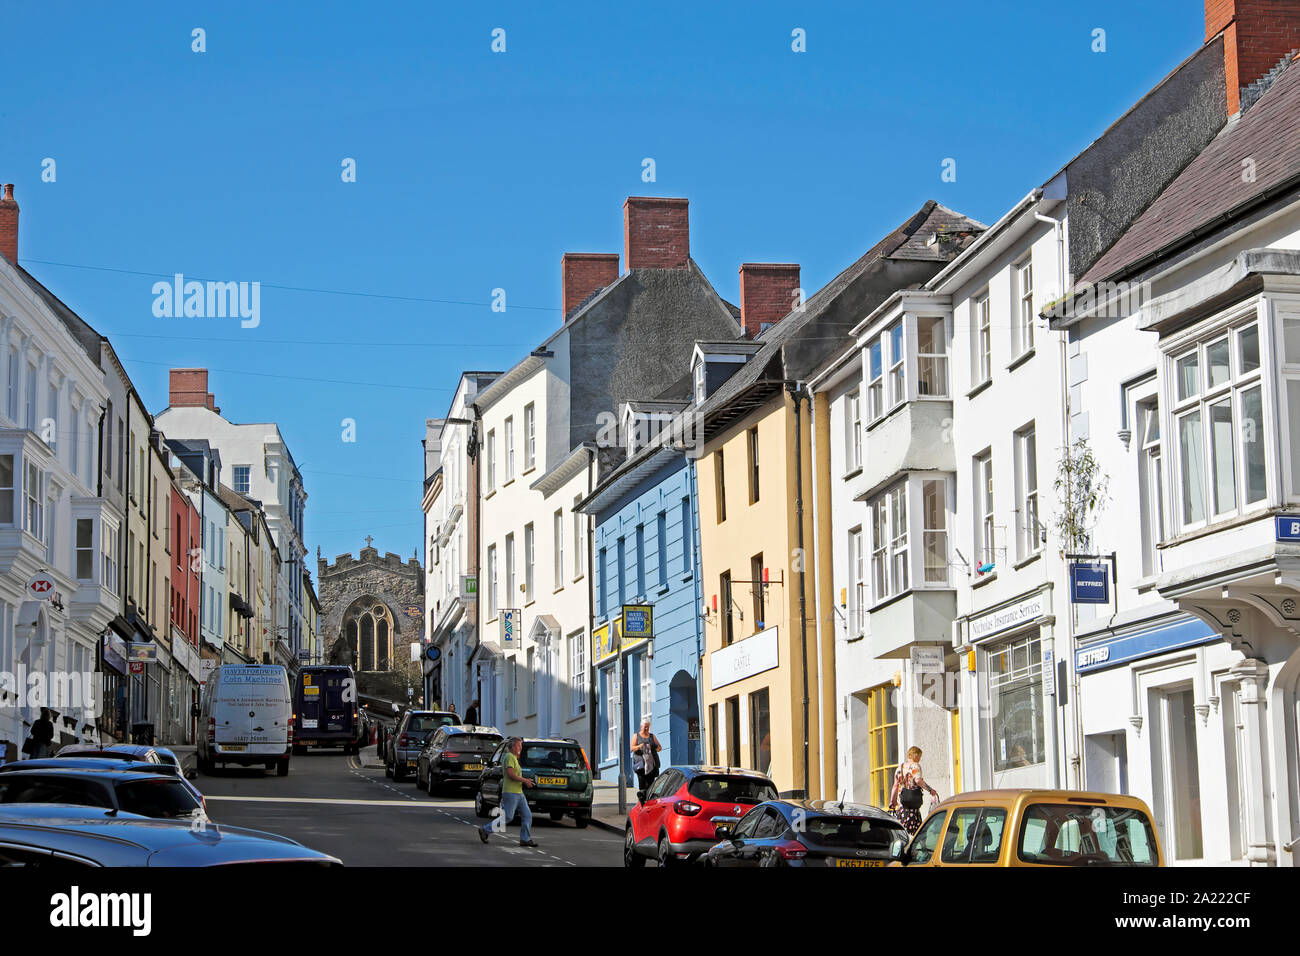 A view of cars parked on Haverfordwest High Street in Pembrokeshire West Wales UK  KATHY DEWITT Stock Photo